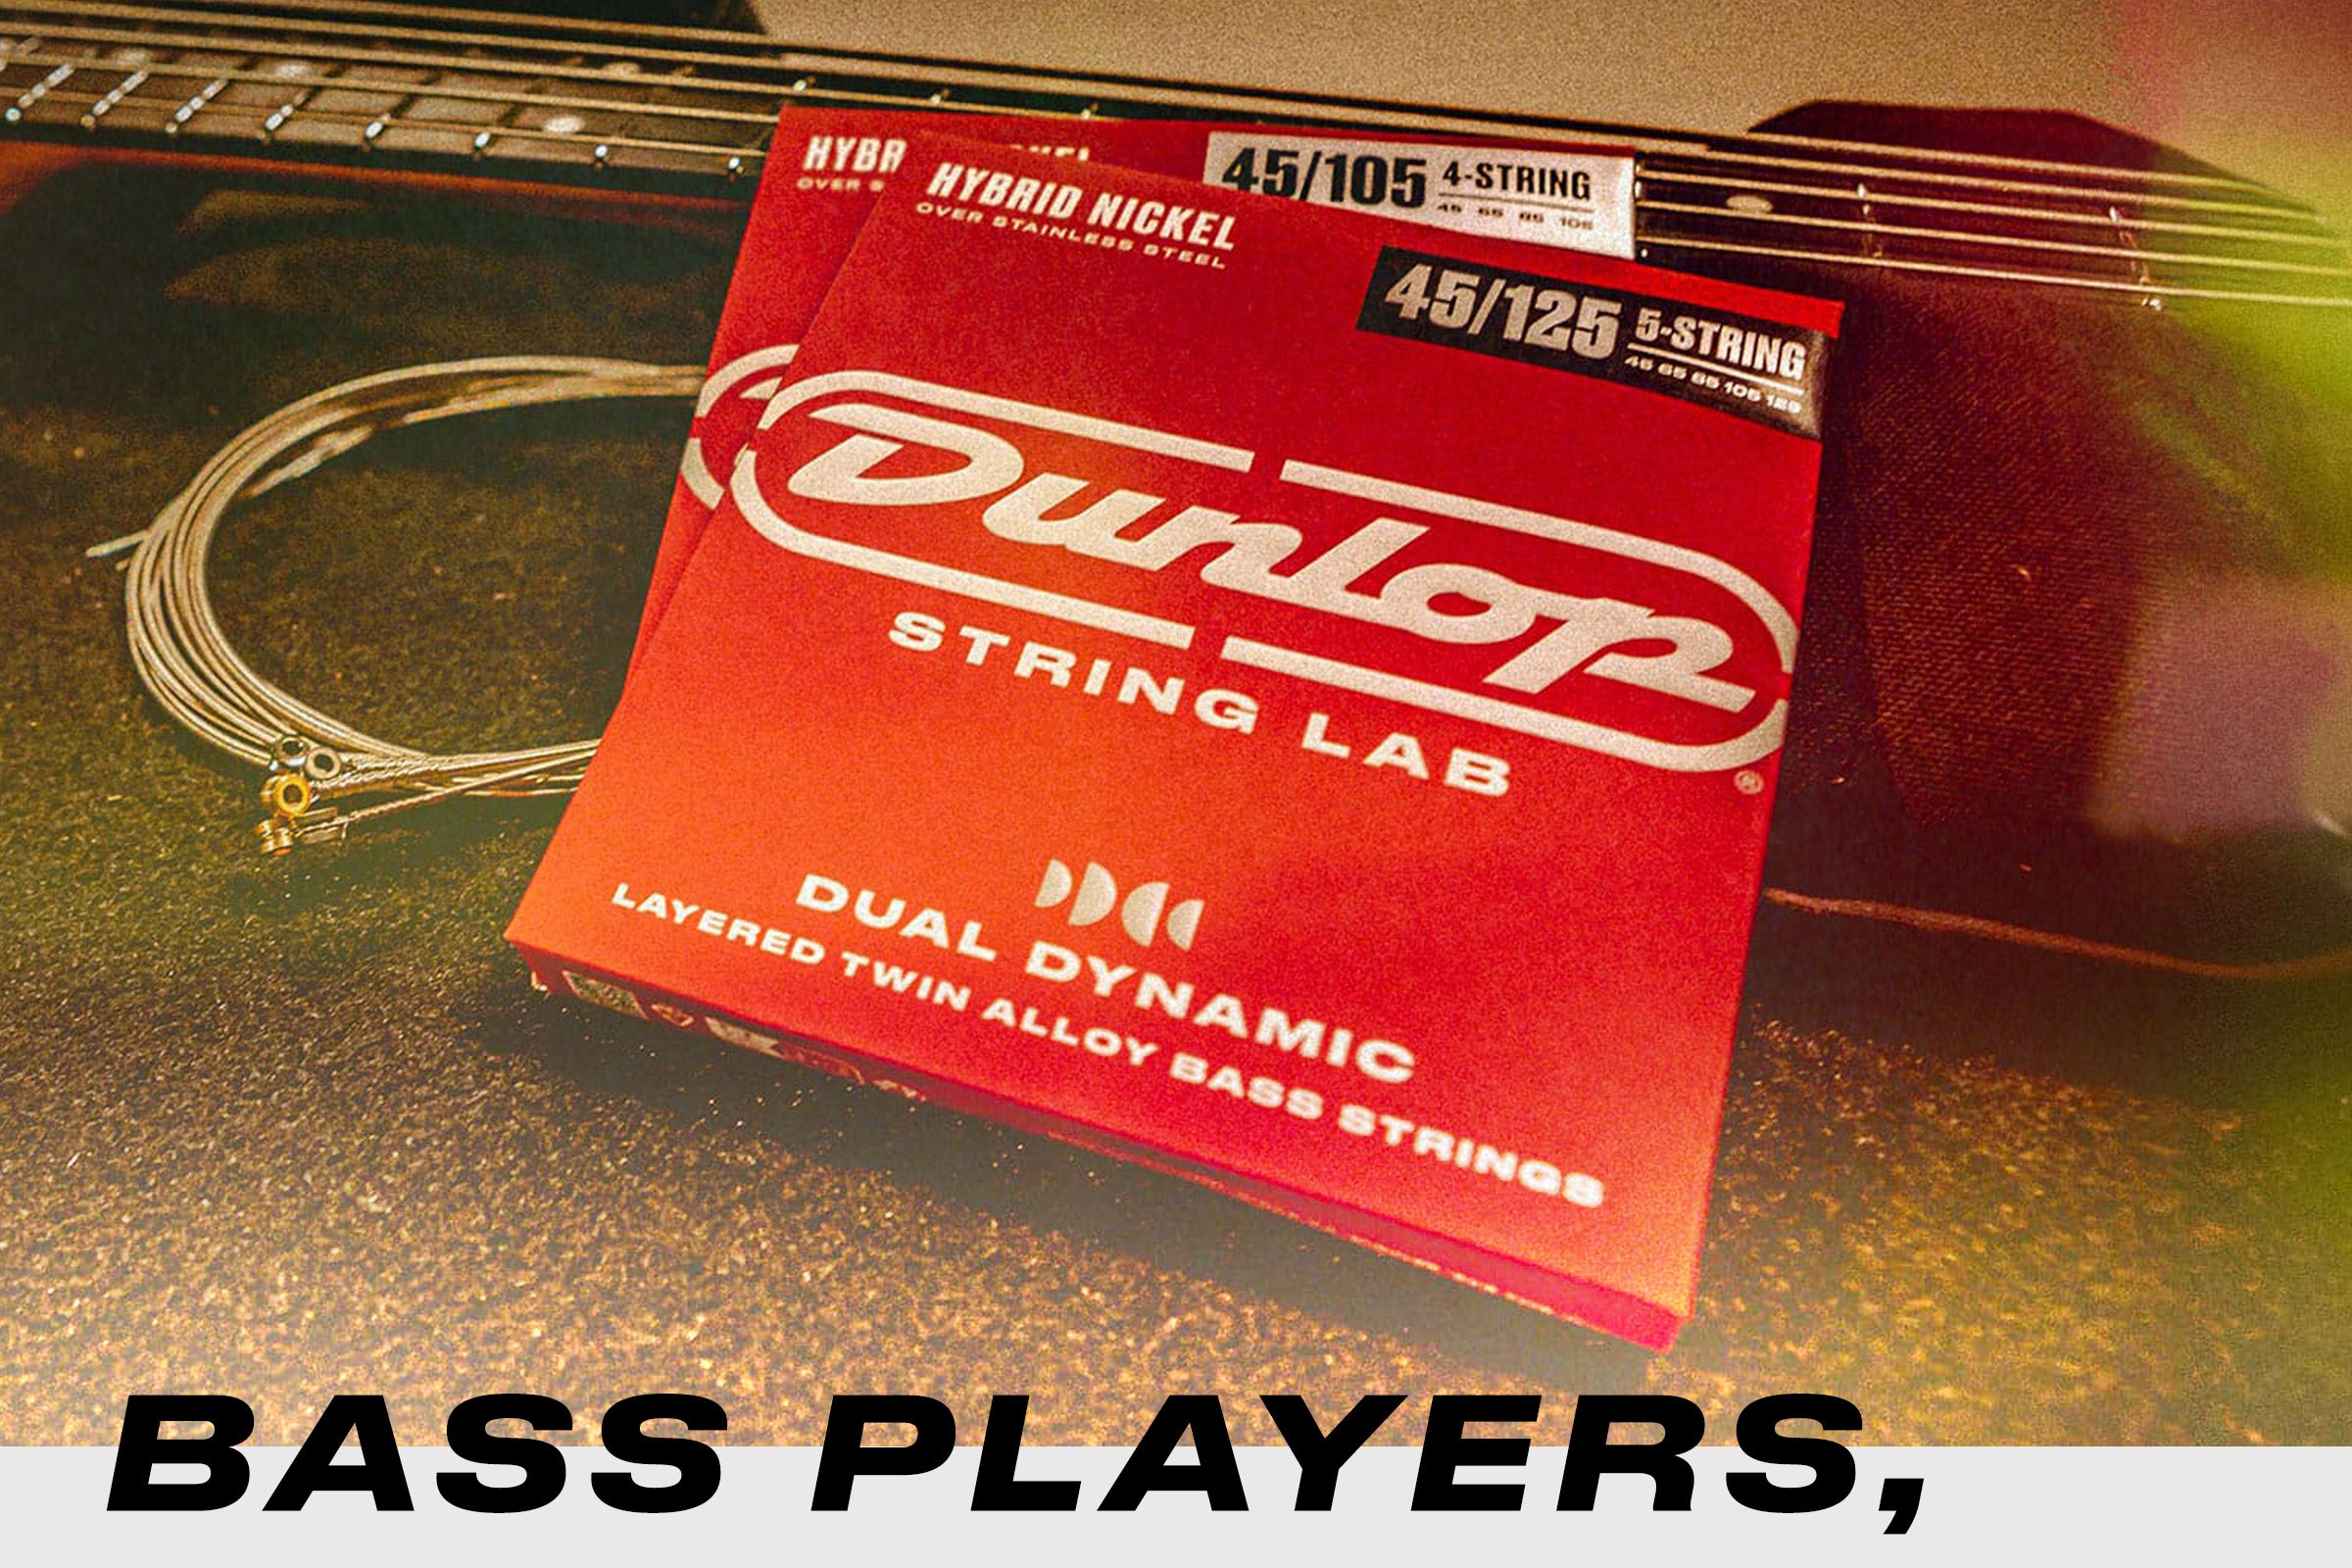 DUAL DYNAMIC LAYERED TWIN ALLOY HYBRID WOUND NICKEL BASS STRINGS